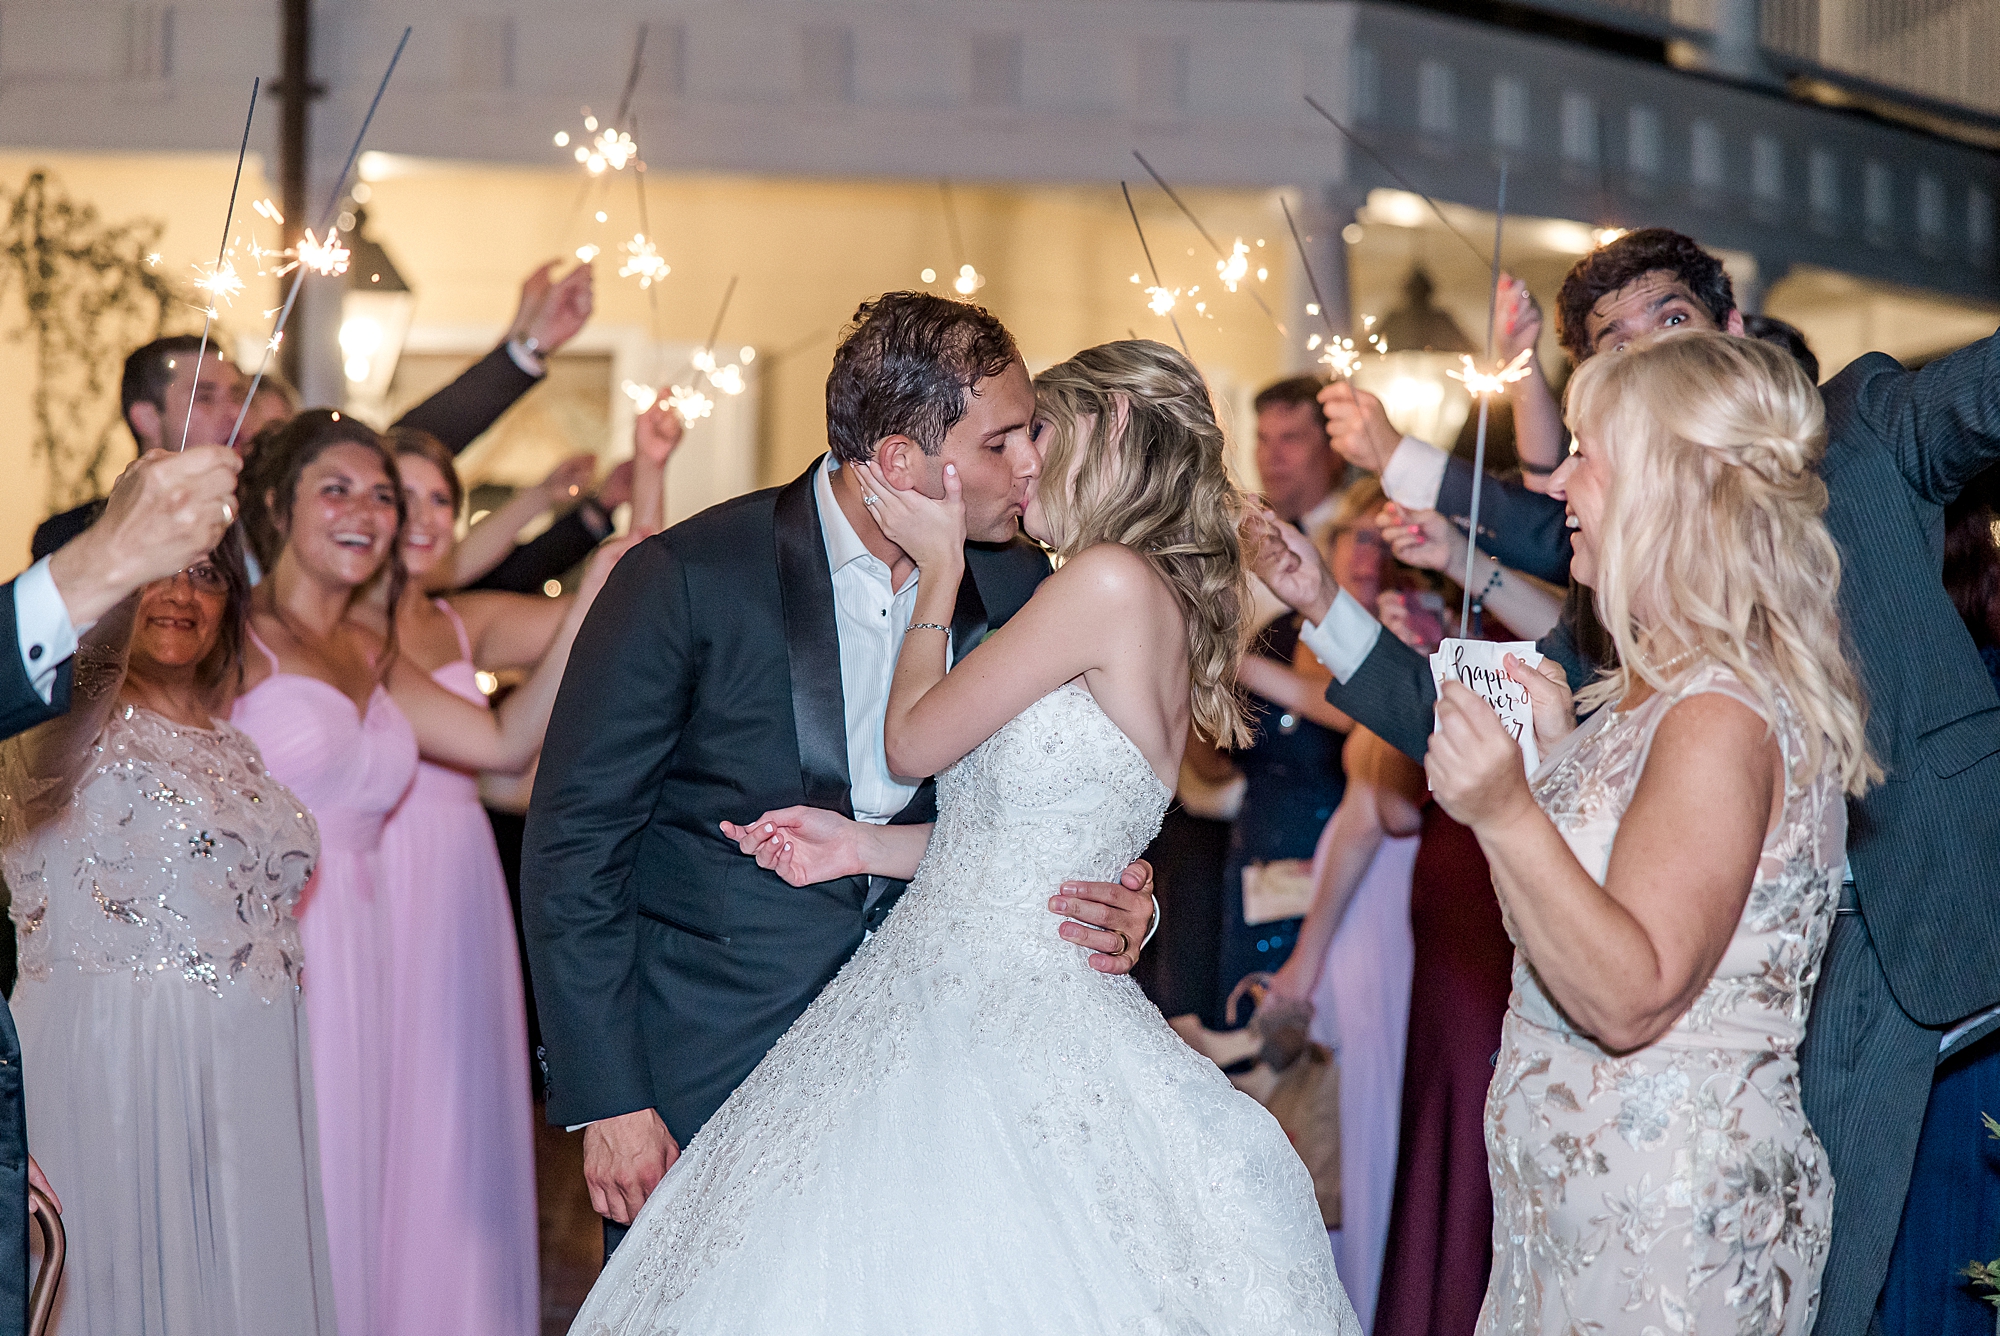 newlyweds kiss as they exit wedding reception